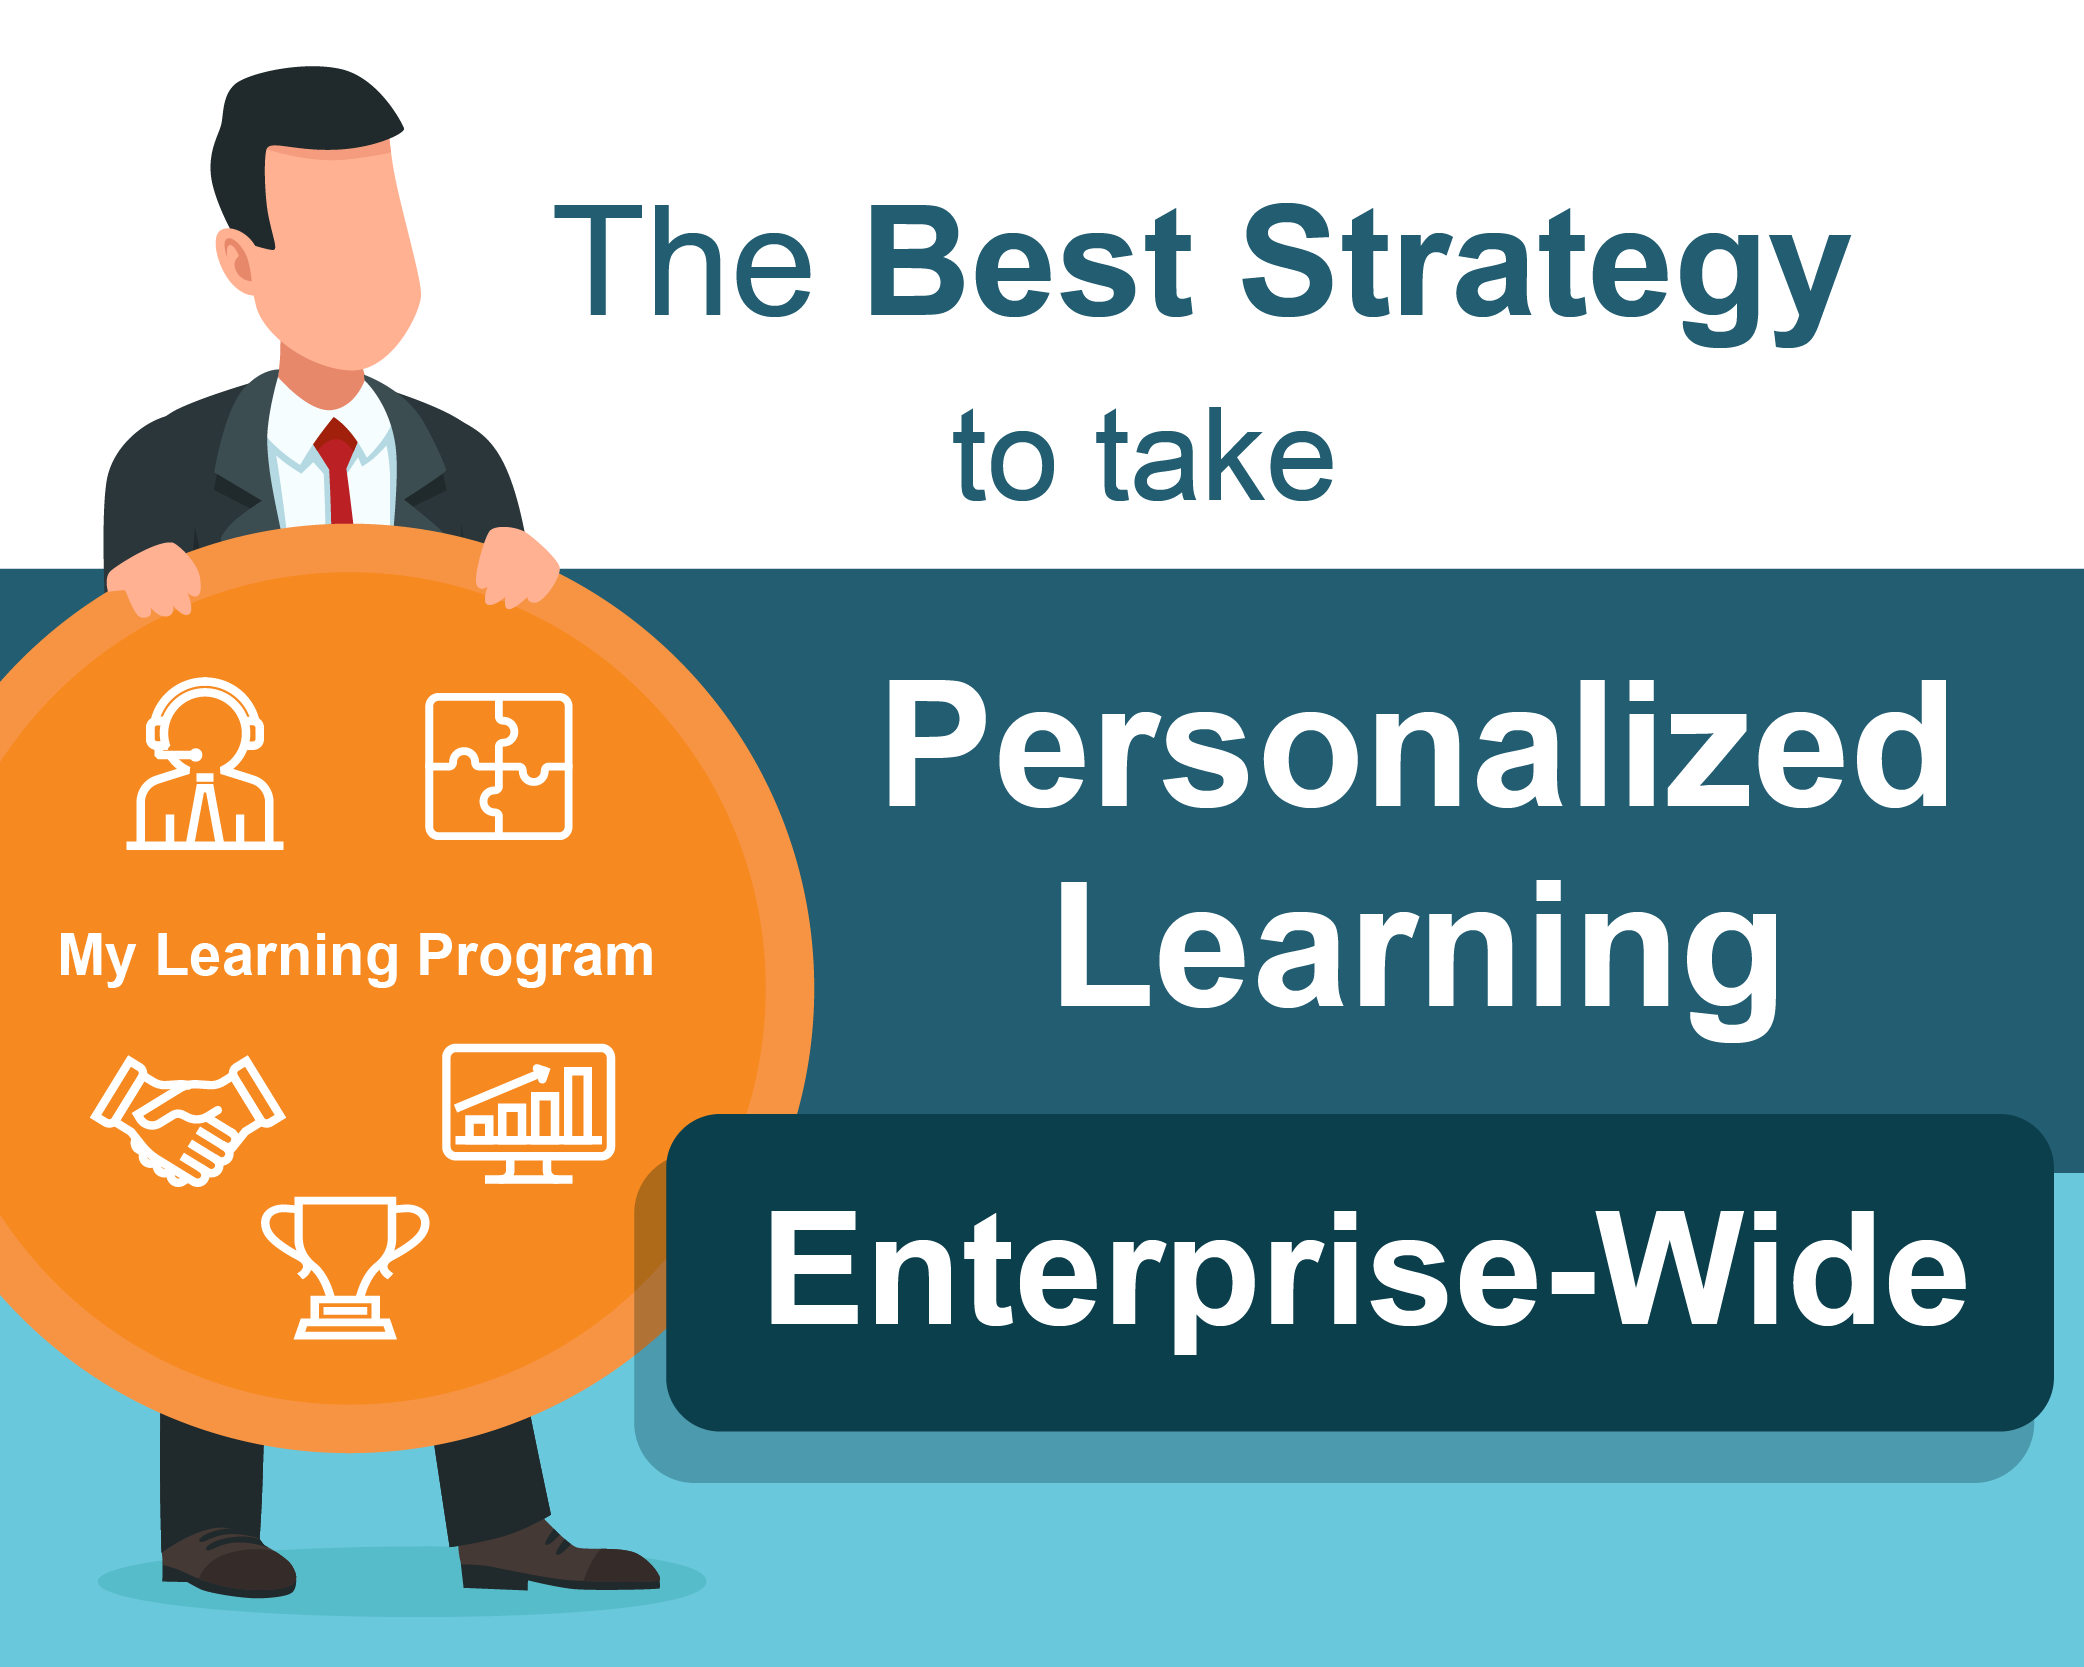 The best strategy to take personalized learning enterprise-wide